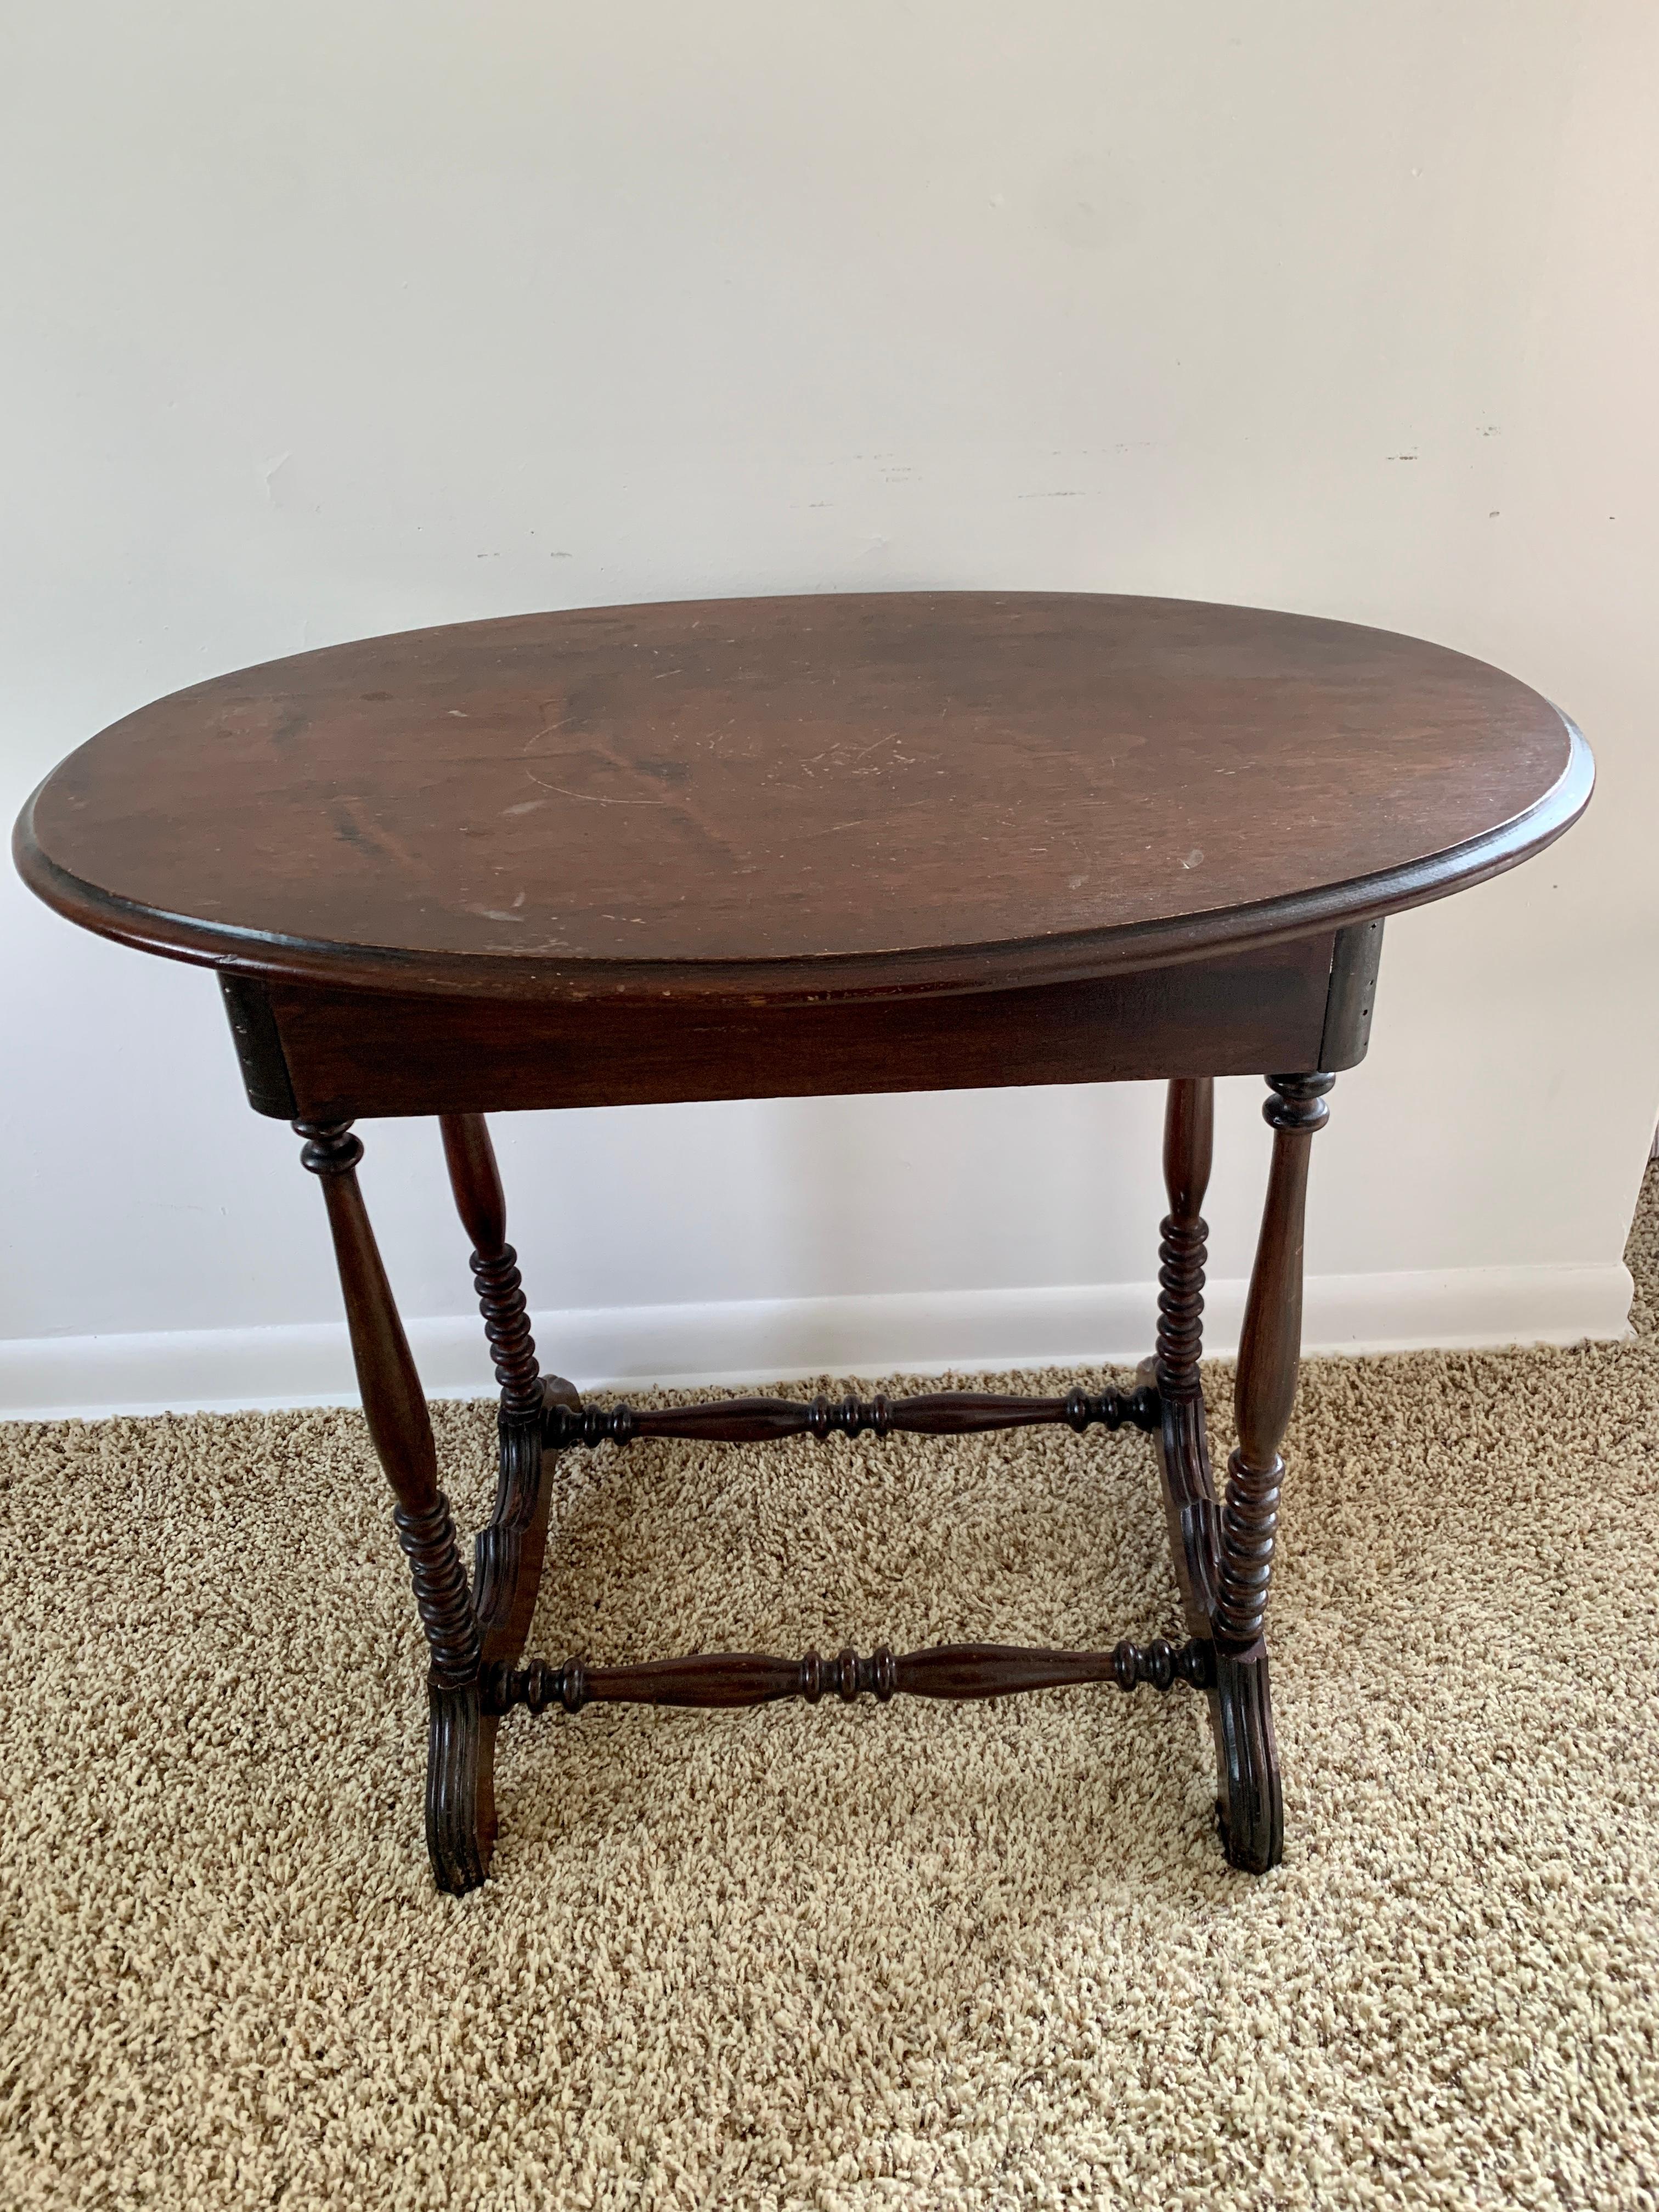 A gorgeous Victorian walnut oval side or center table

USA, circa late 19th century

Measures: 32.75